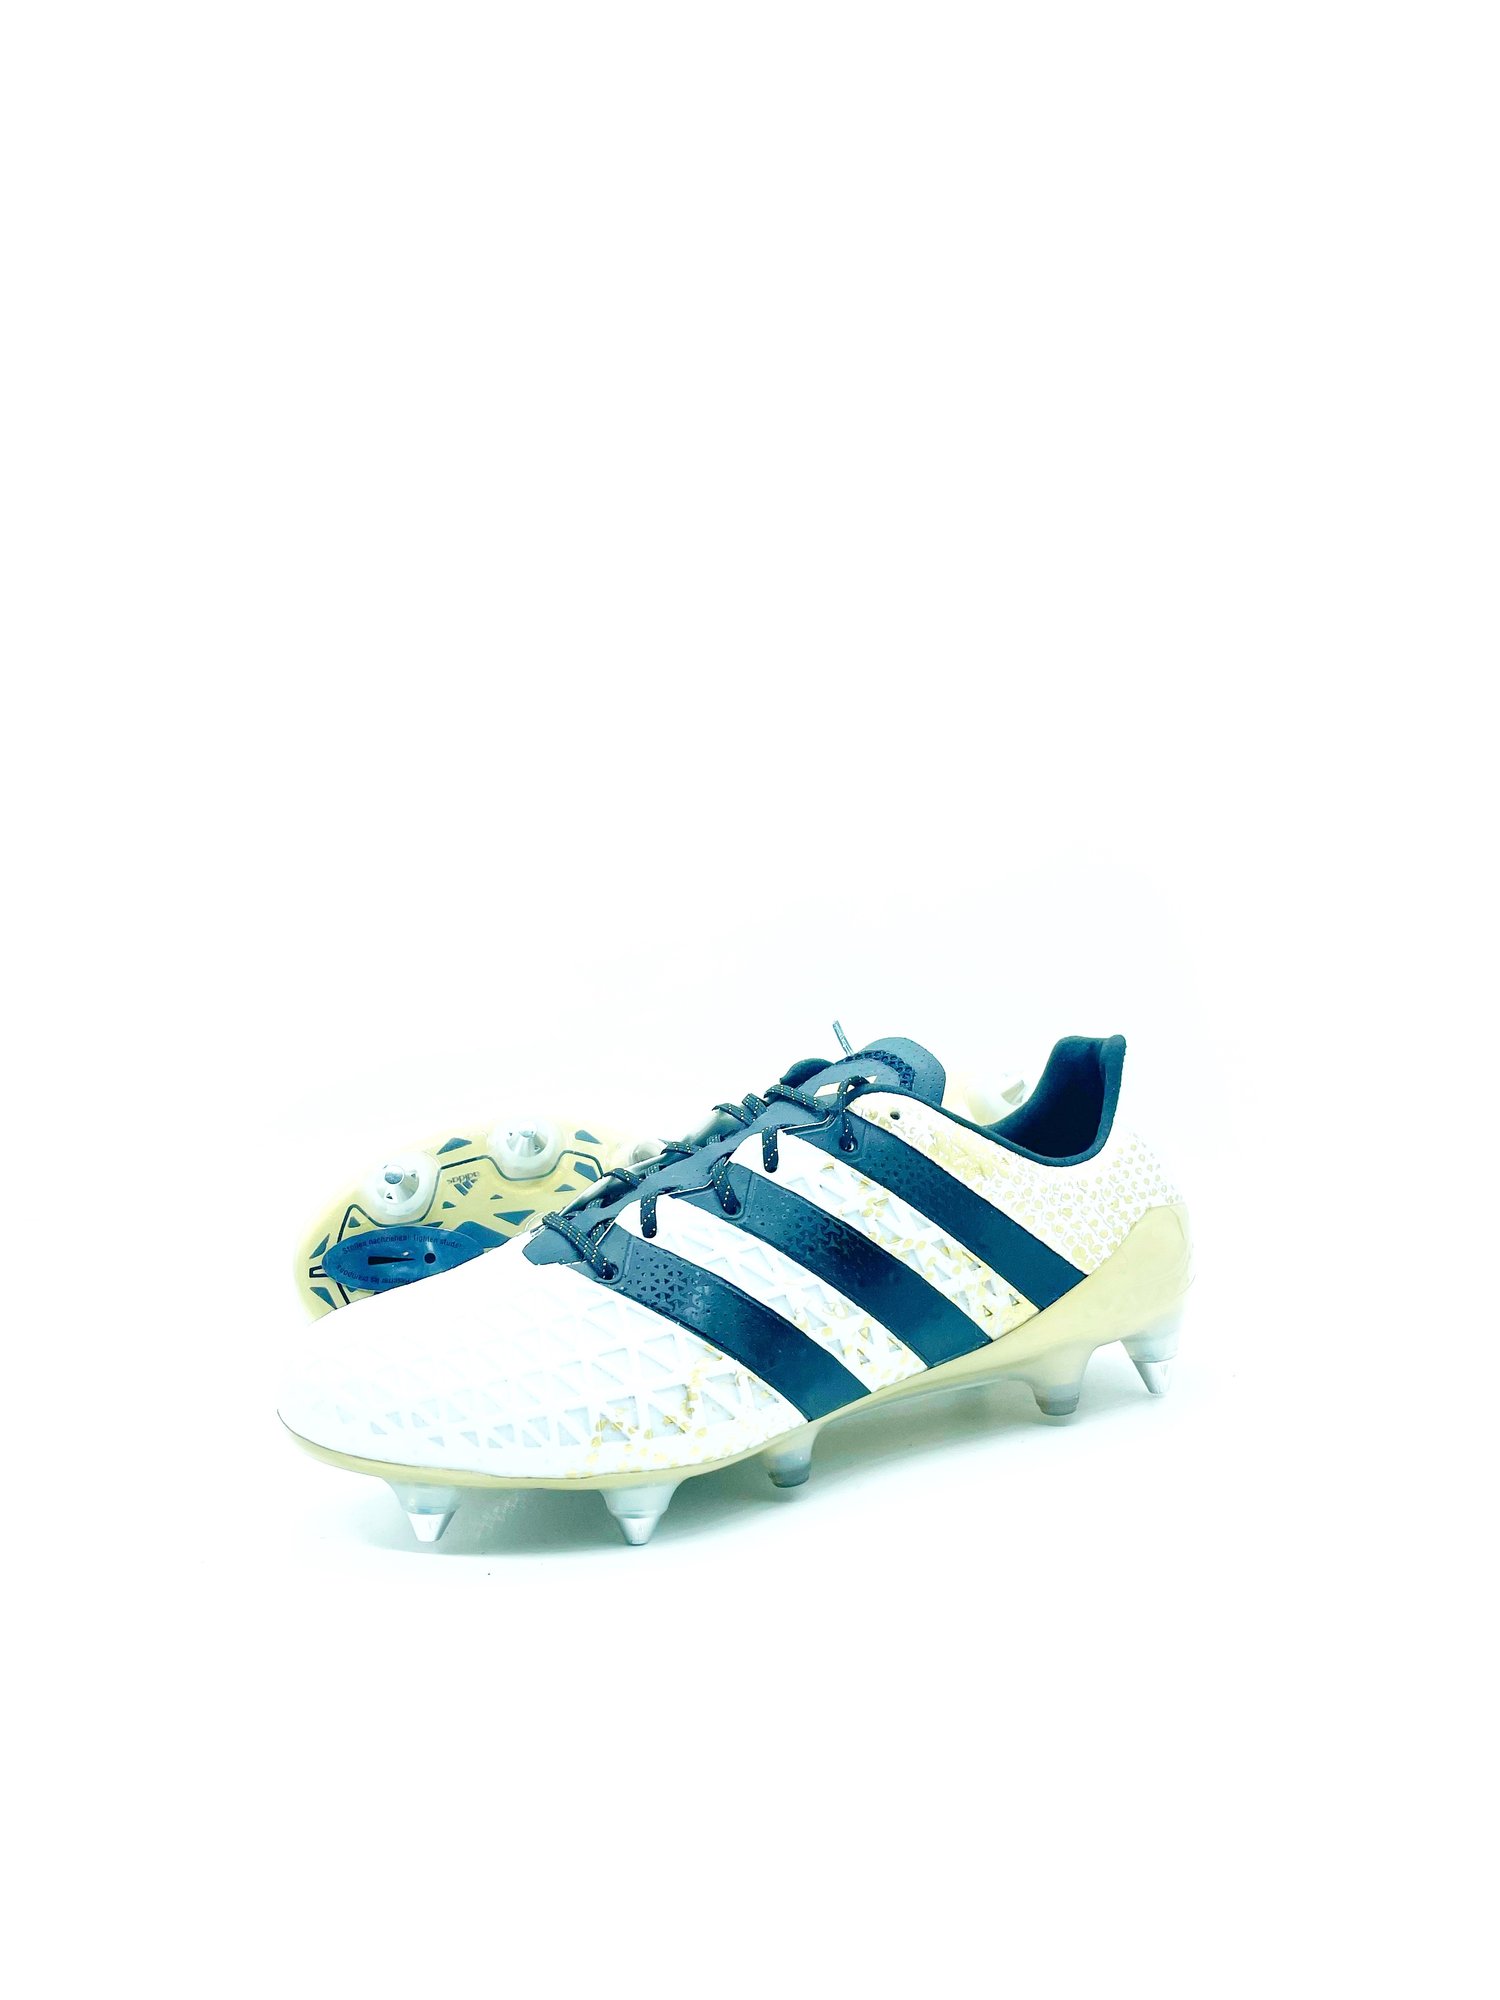 Image of Adidas 16.1 ACE gold WHITE SG or FG